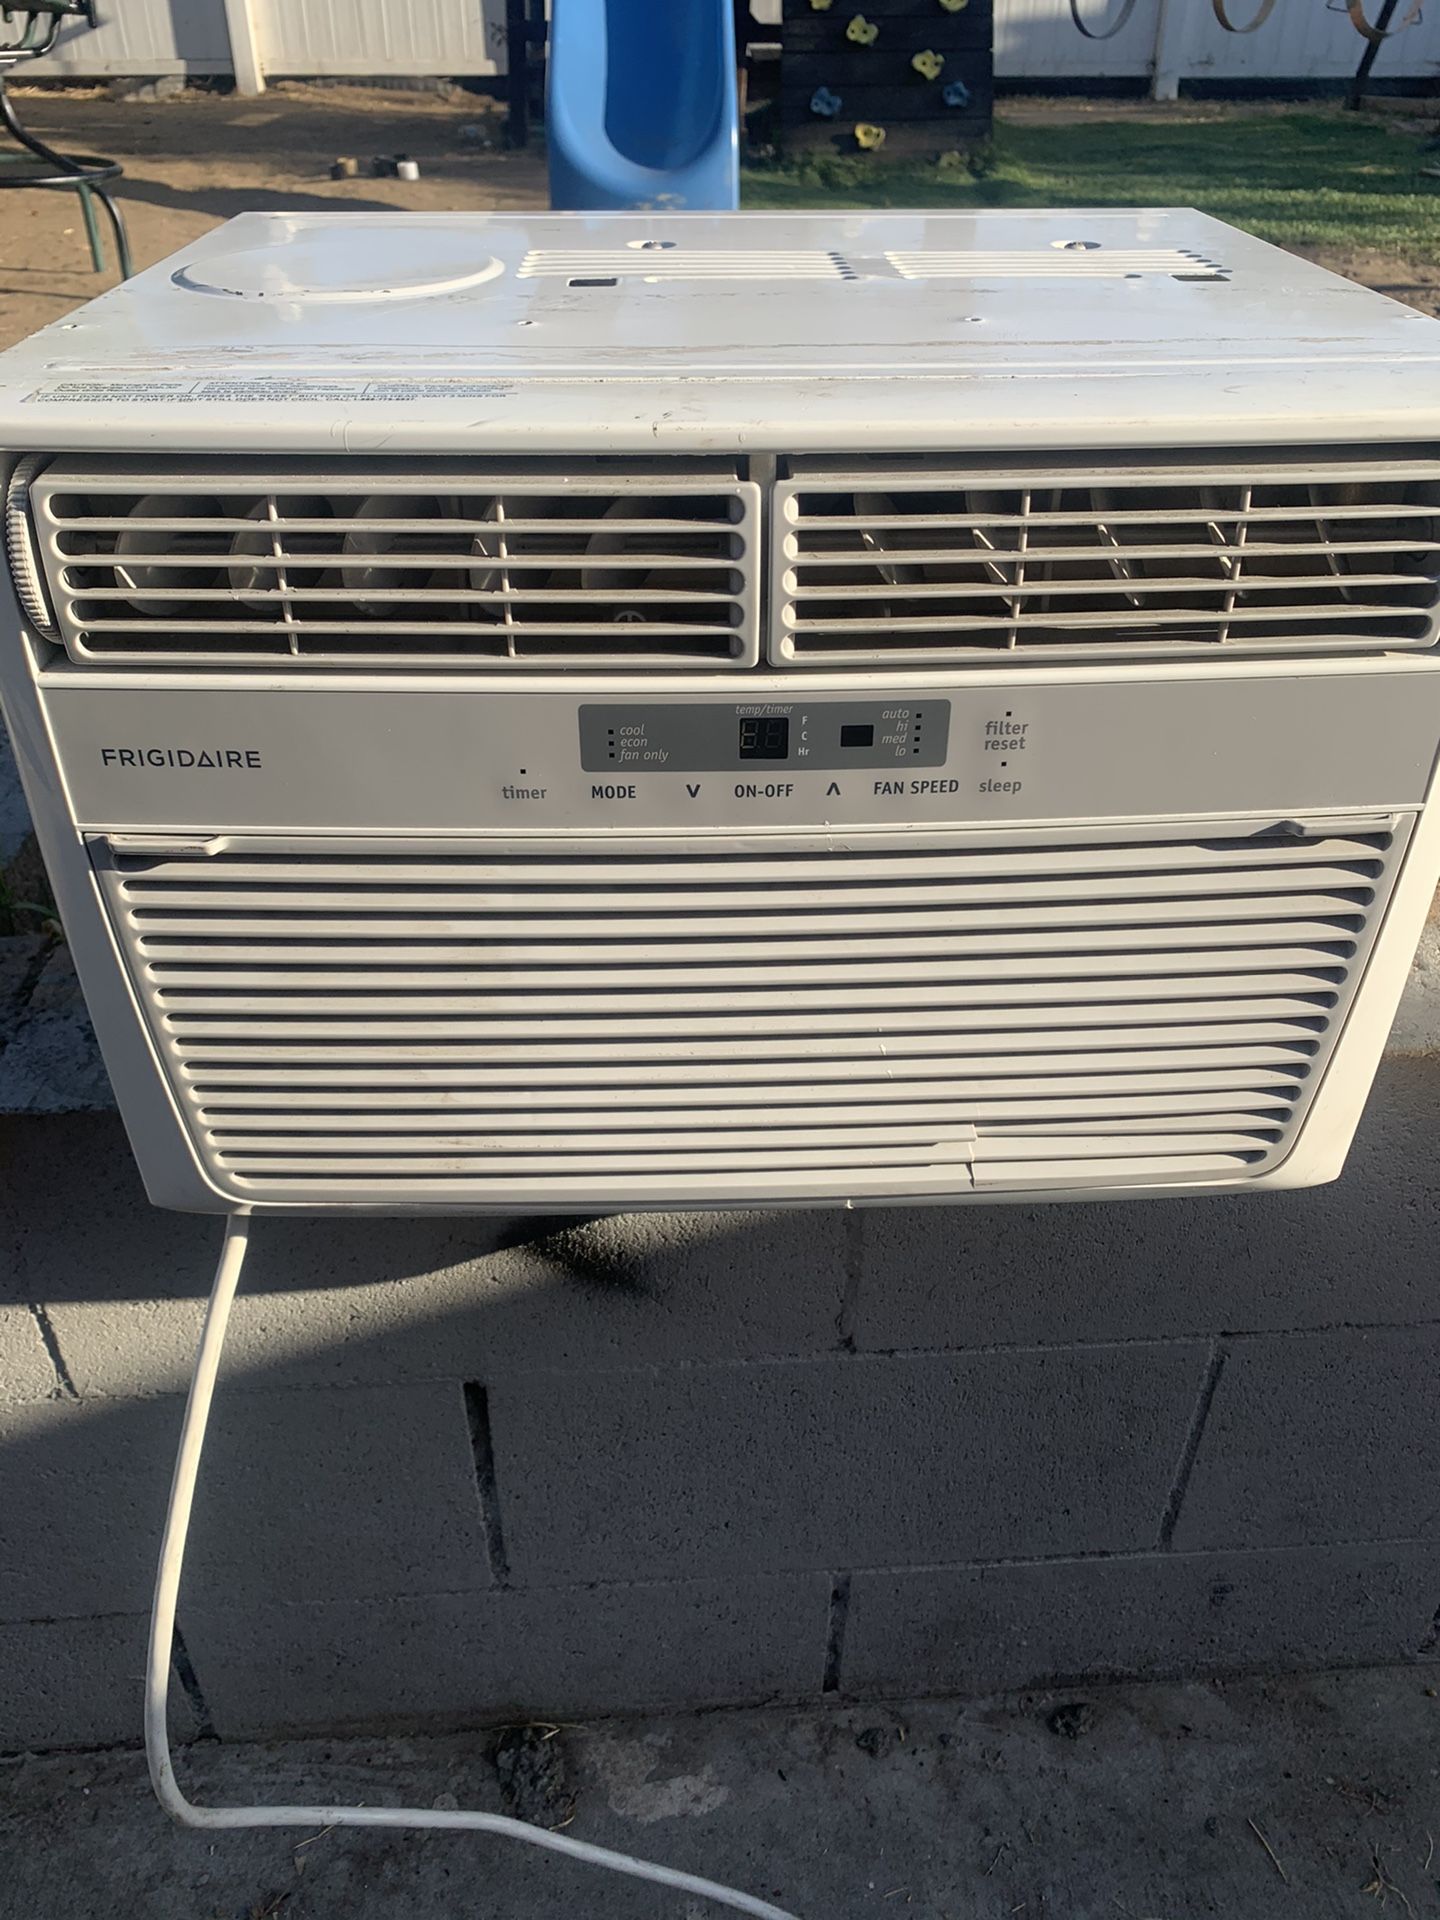 Ac works great gets very cold is 6000 btu Asking 130